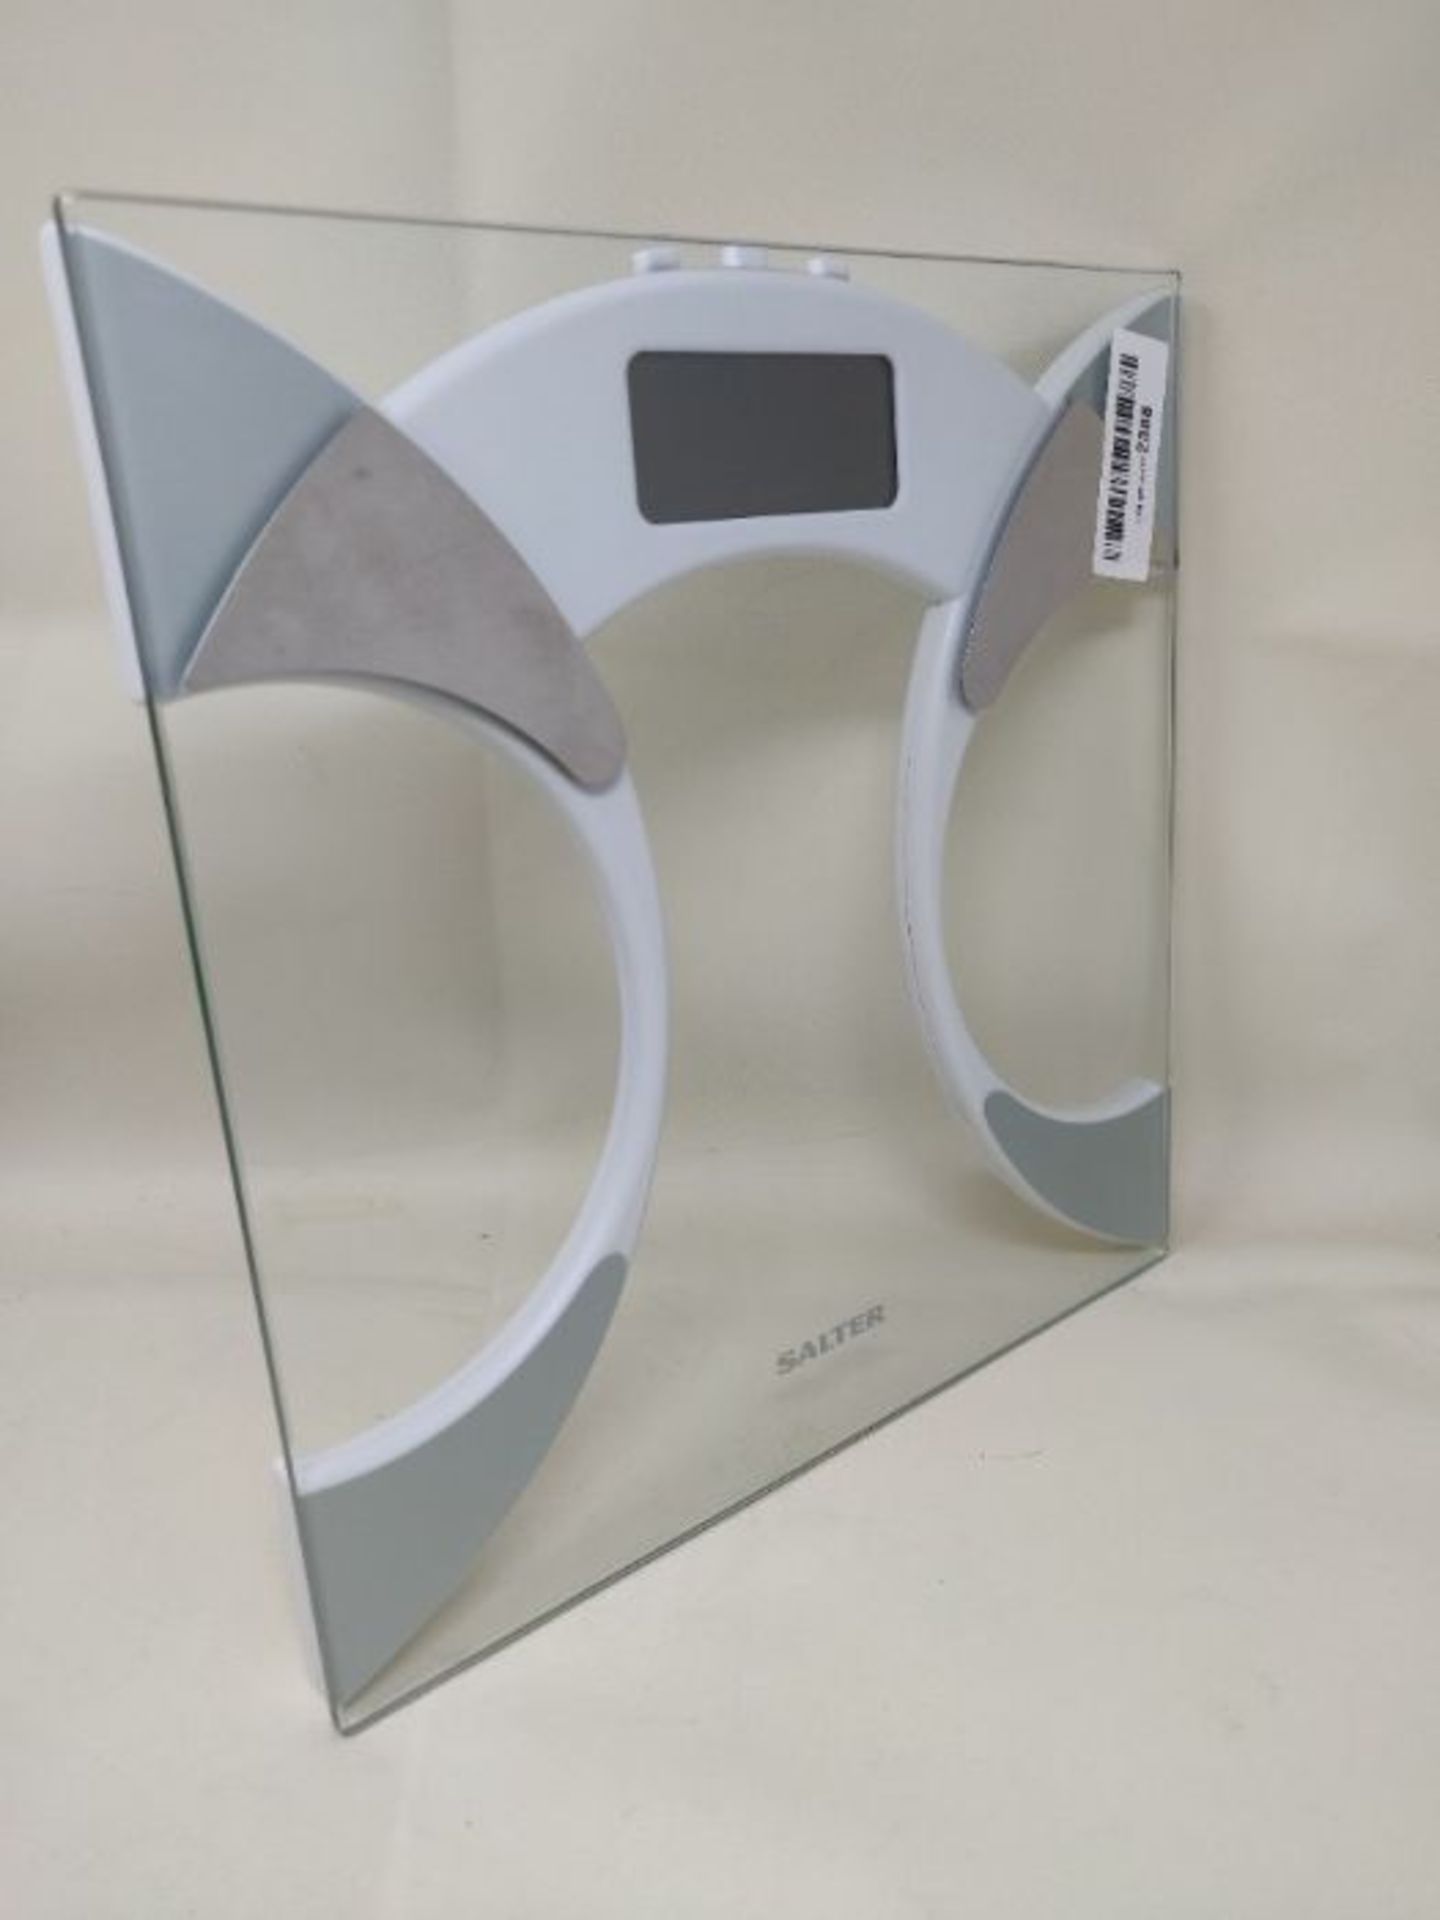 Salter Ultra Slim Analyser Bathroom Scales, Measure Weight BMI BMR Body Fat Percentage - Image 2 of 2